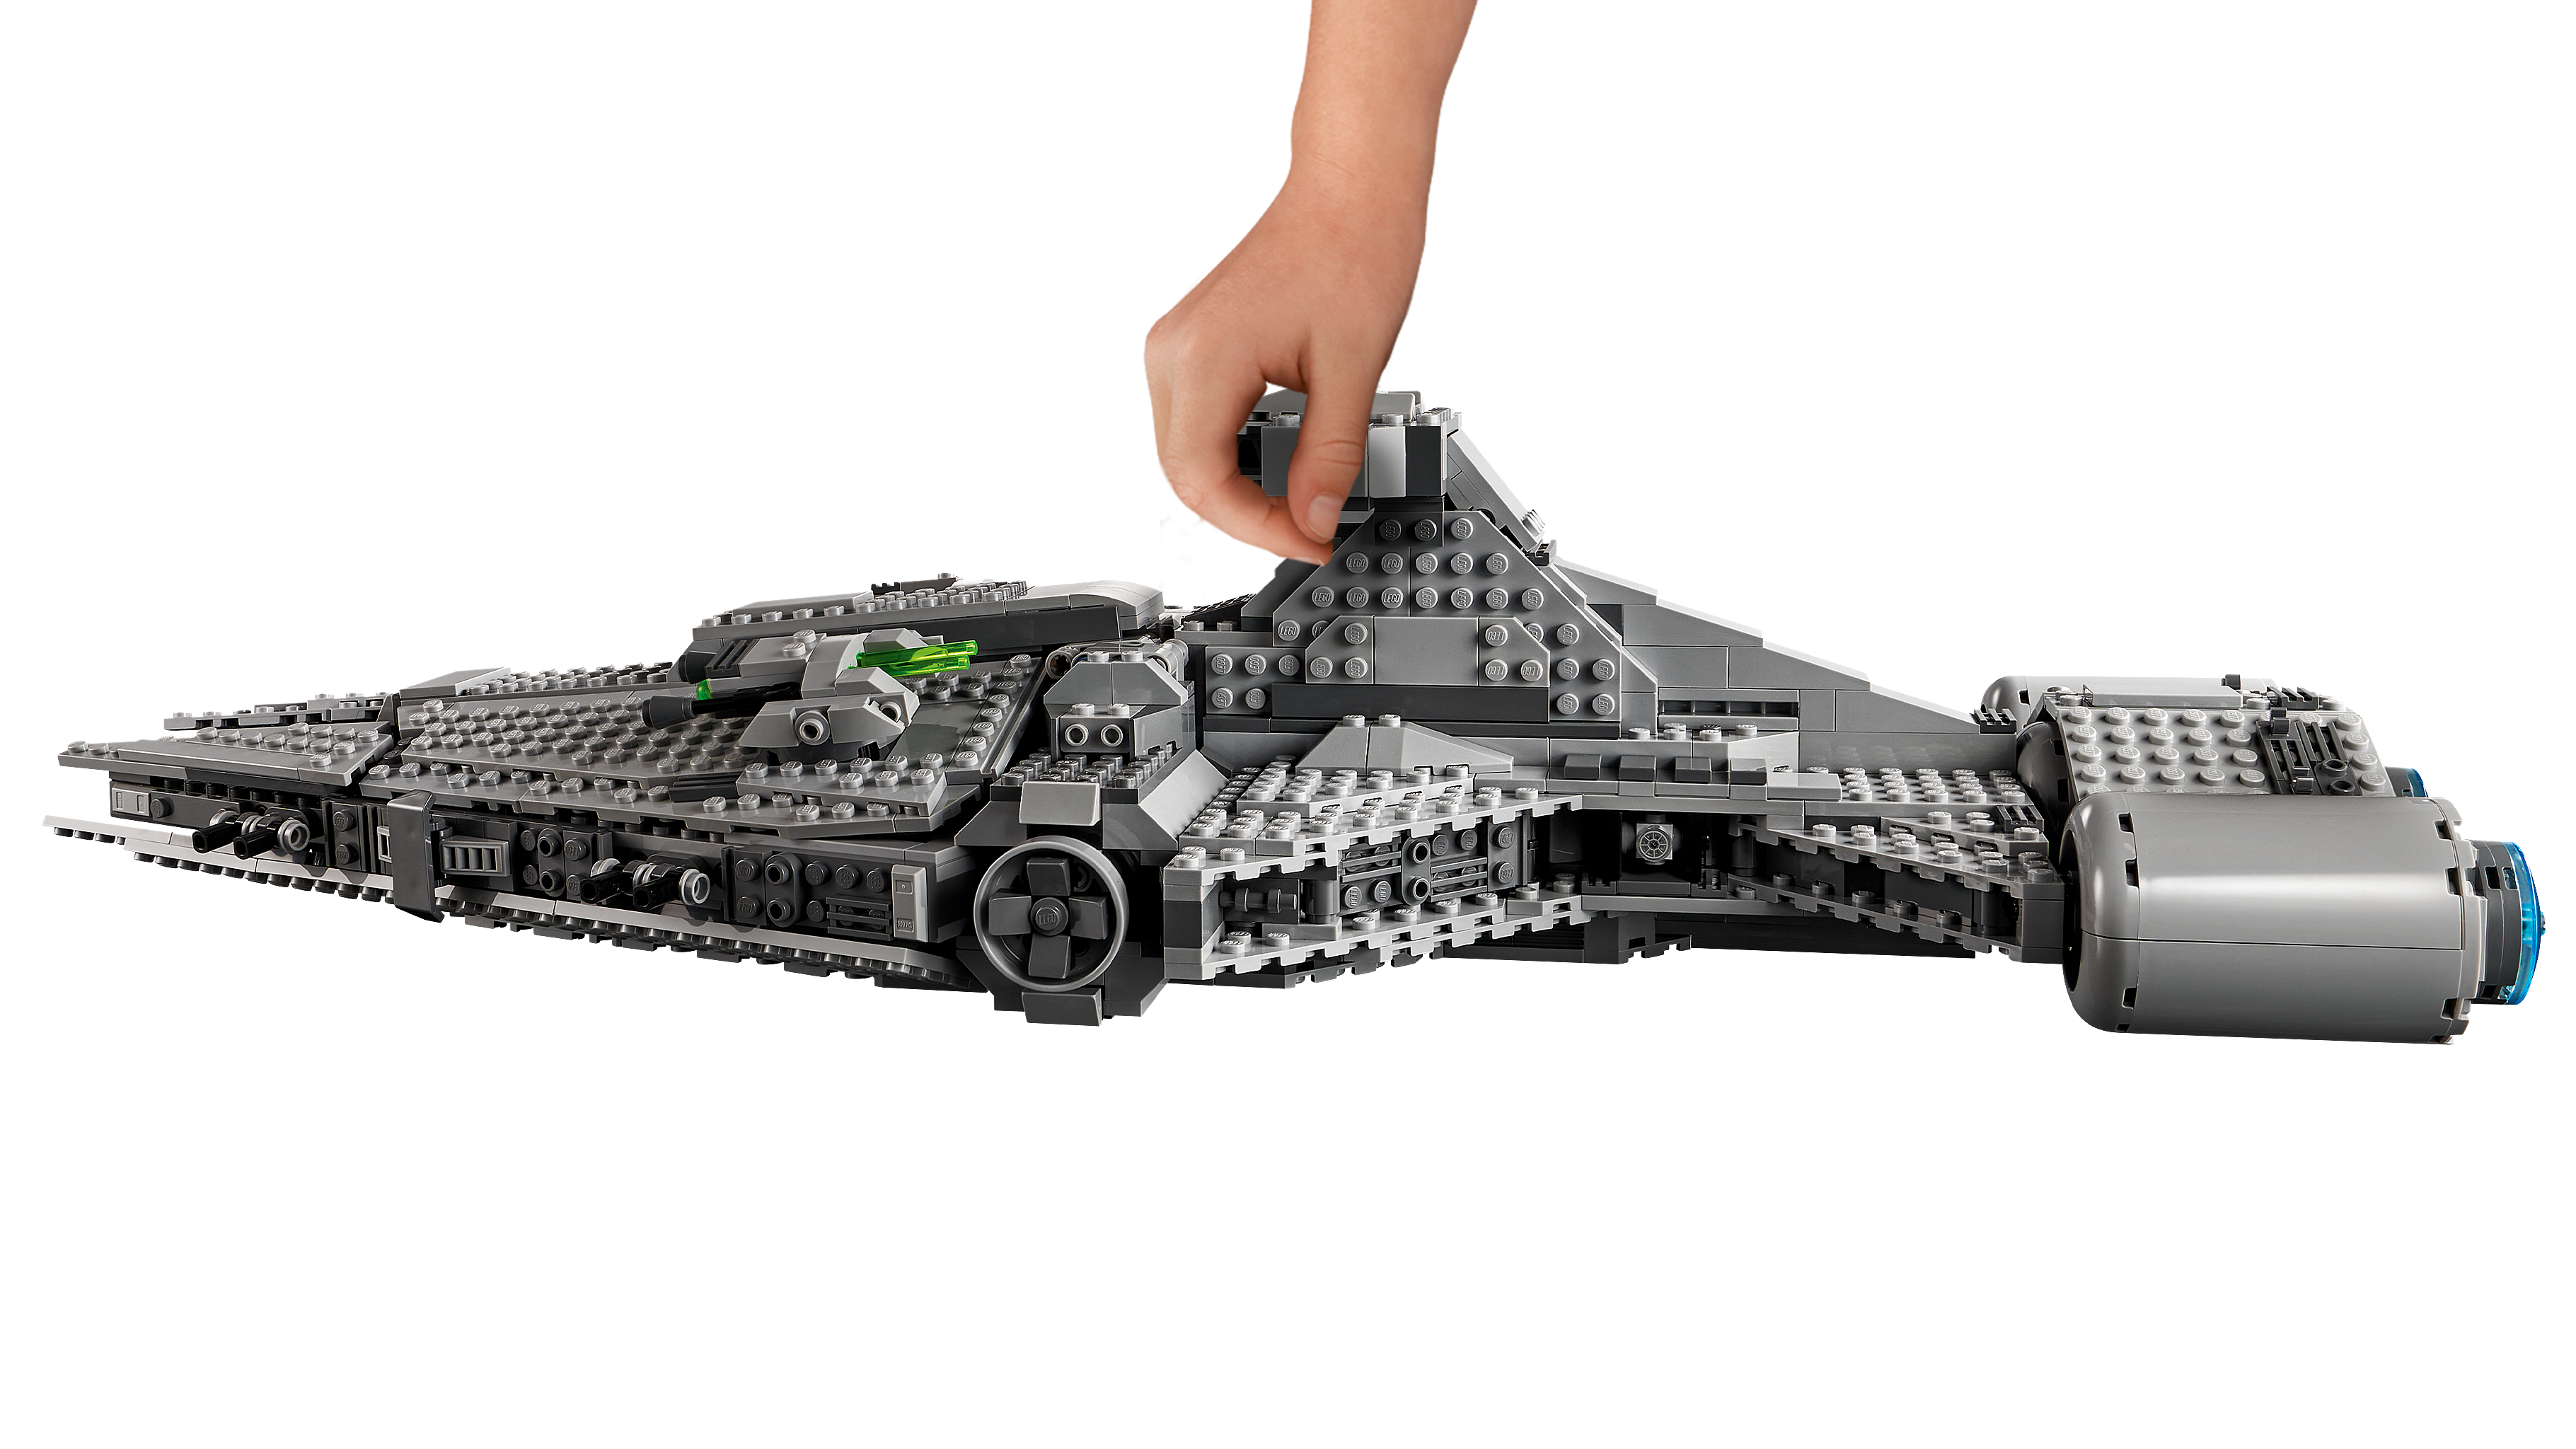 1,336 Pieces Featuring 5 Minifigures; New 2021 LEGO Star Wars Imperial Light Cruiser 75315 Awesome Toy Building Kit for Kids 